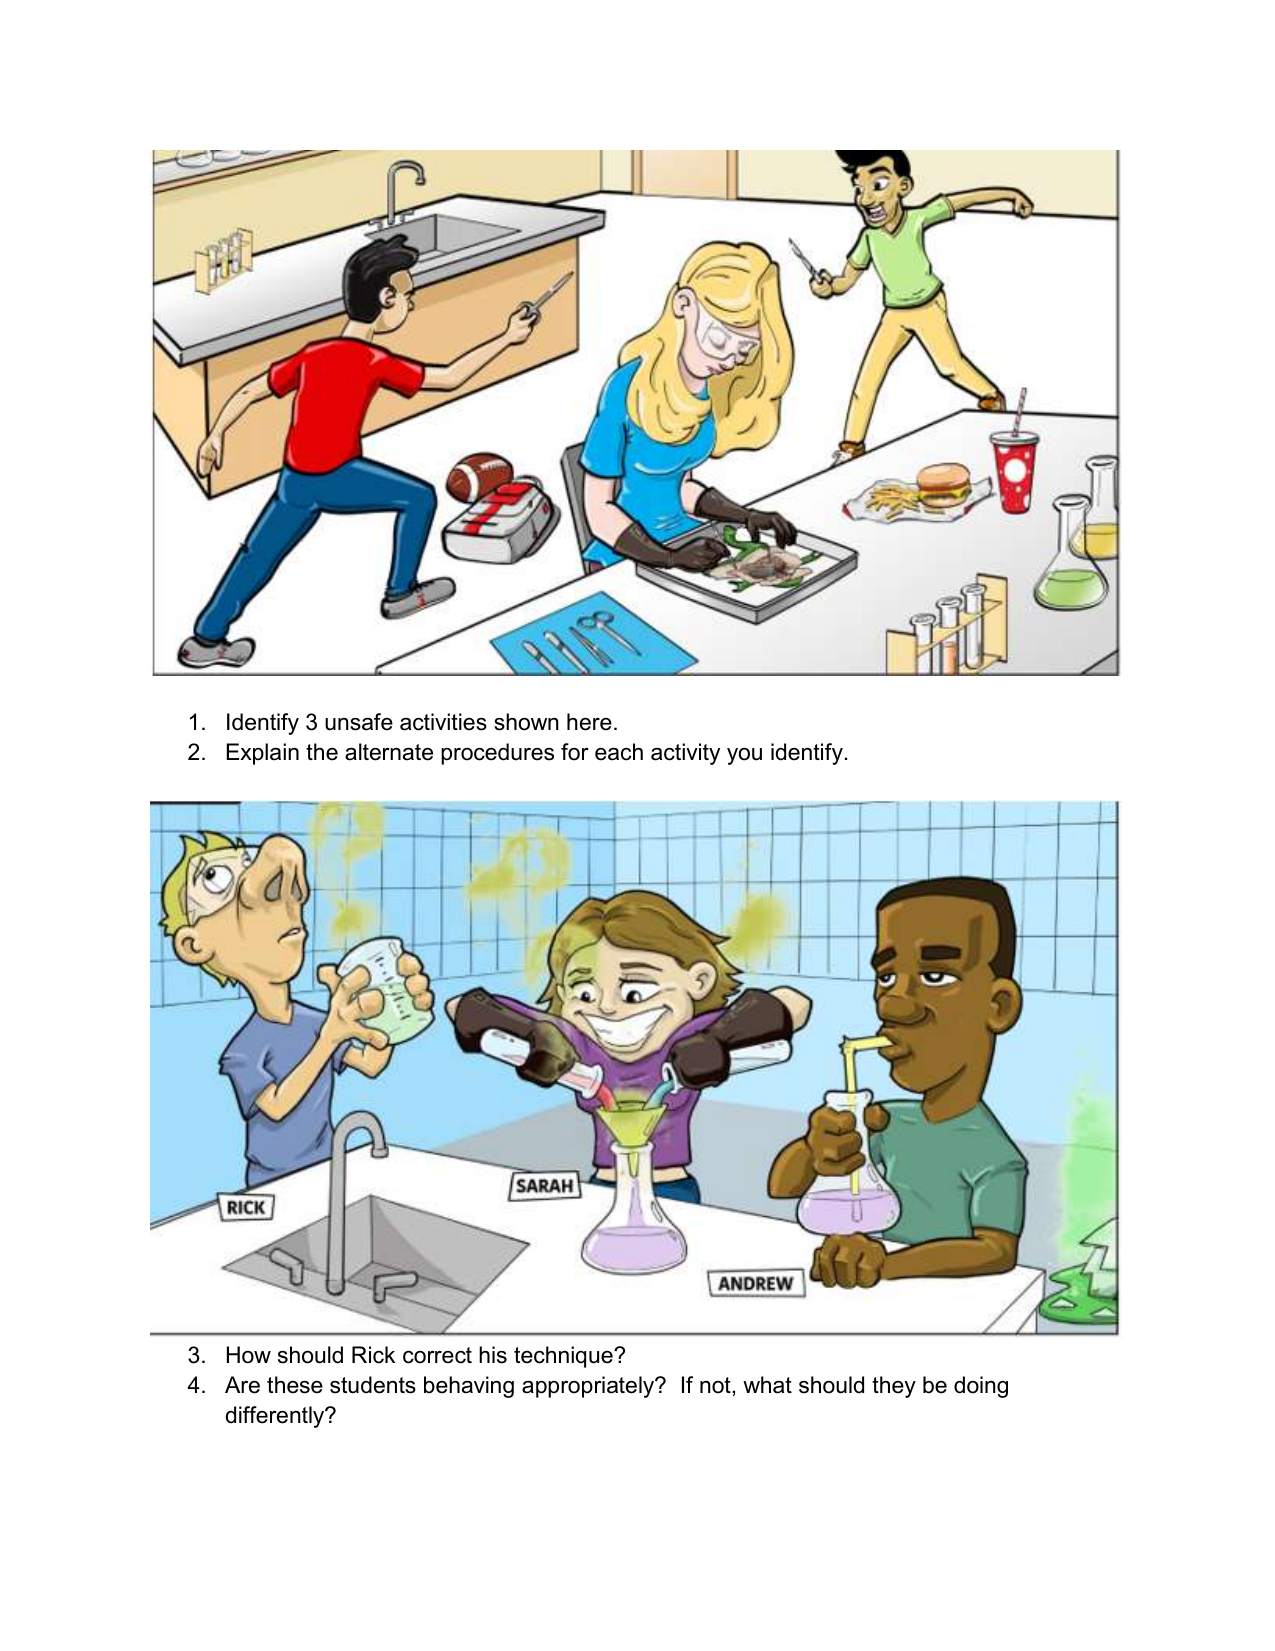 Lab Safety Cartoon with questions